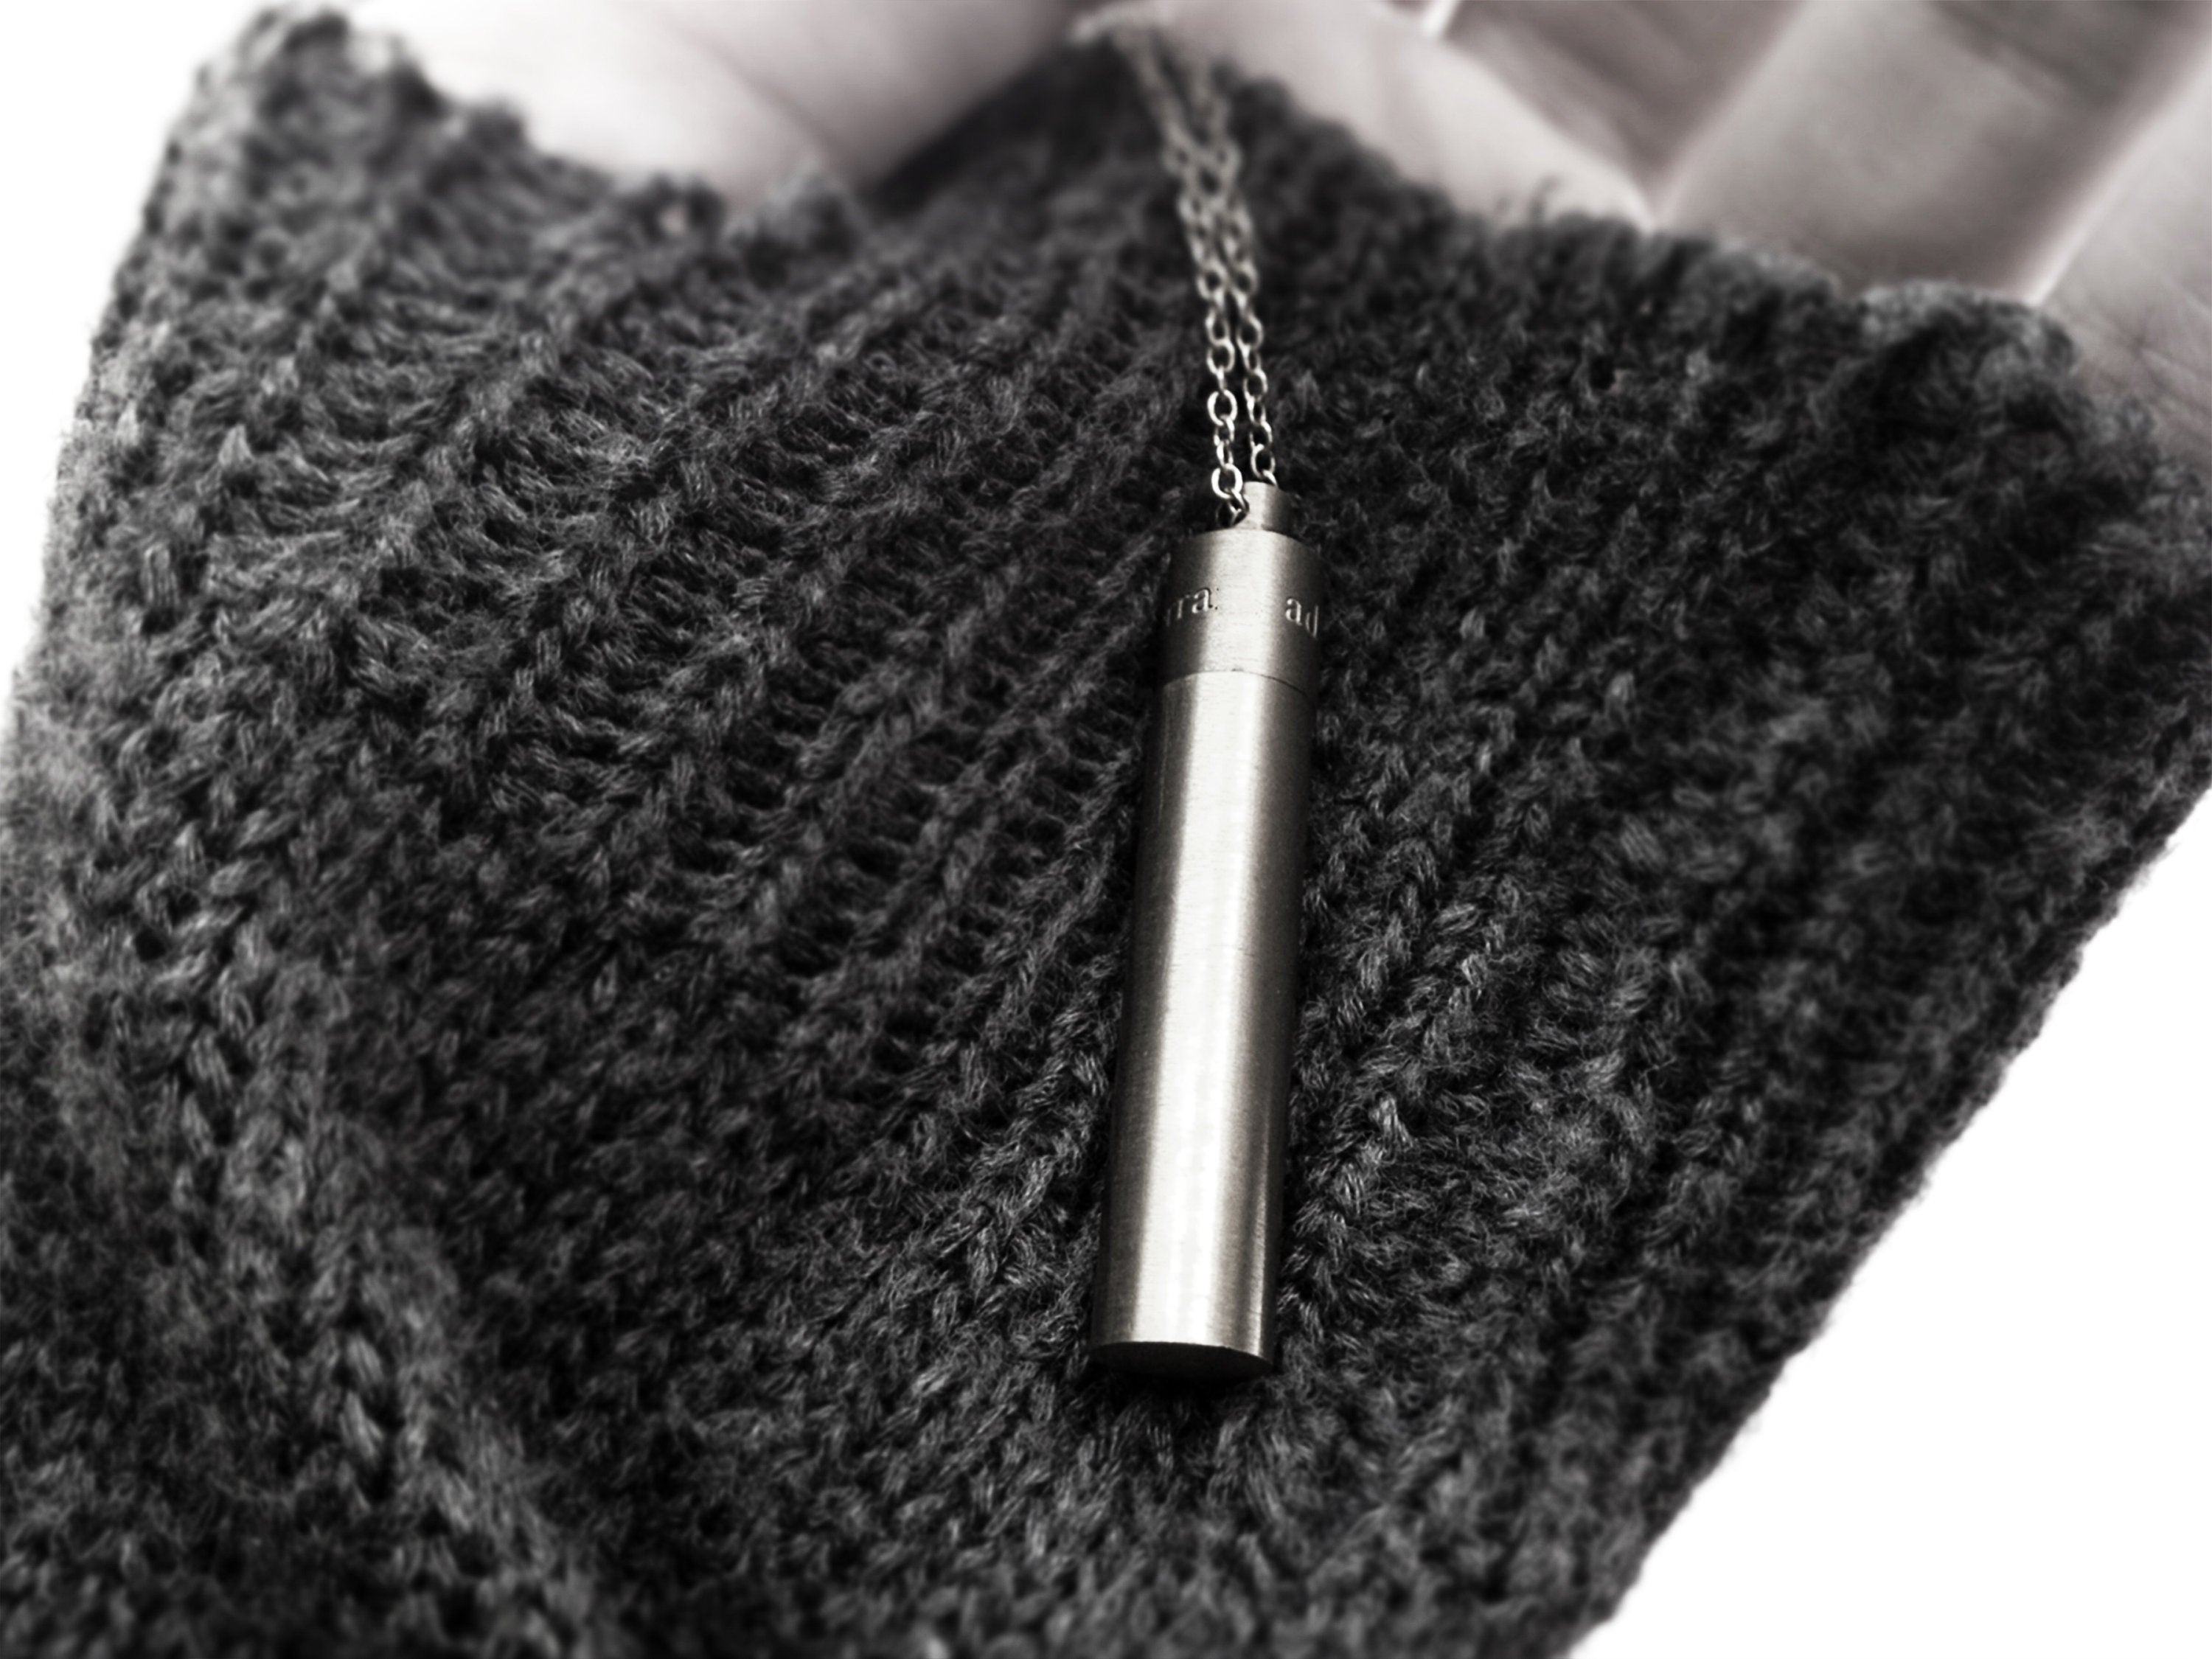 Martian Meteorite Fragment Capsule Necklace - Stainless Steel Space / Astronomy Container Pendant with Glass Vial - EDC Locket Jewelry Gift